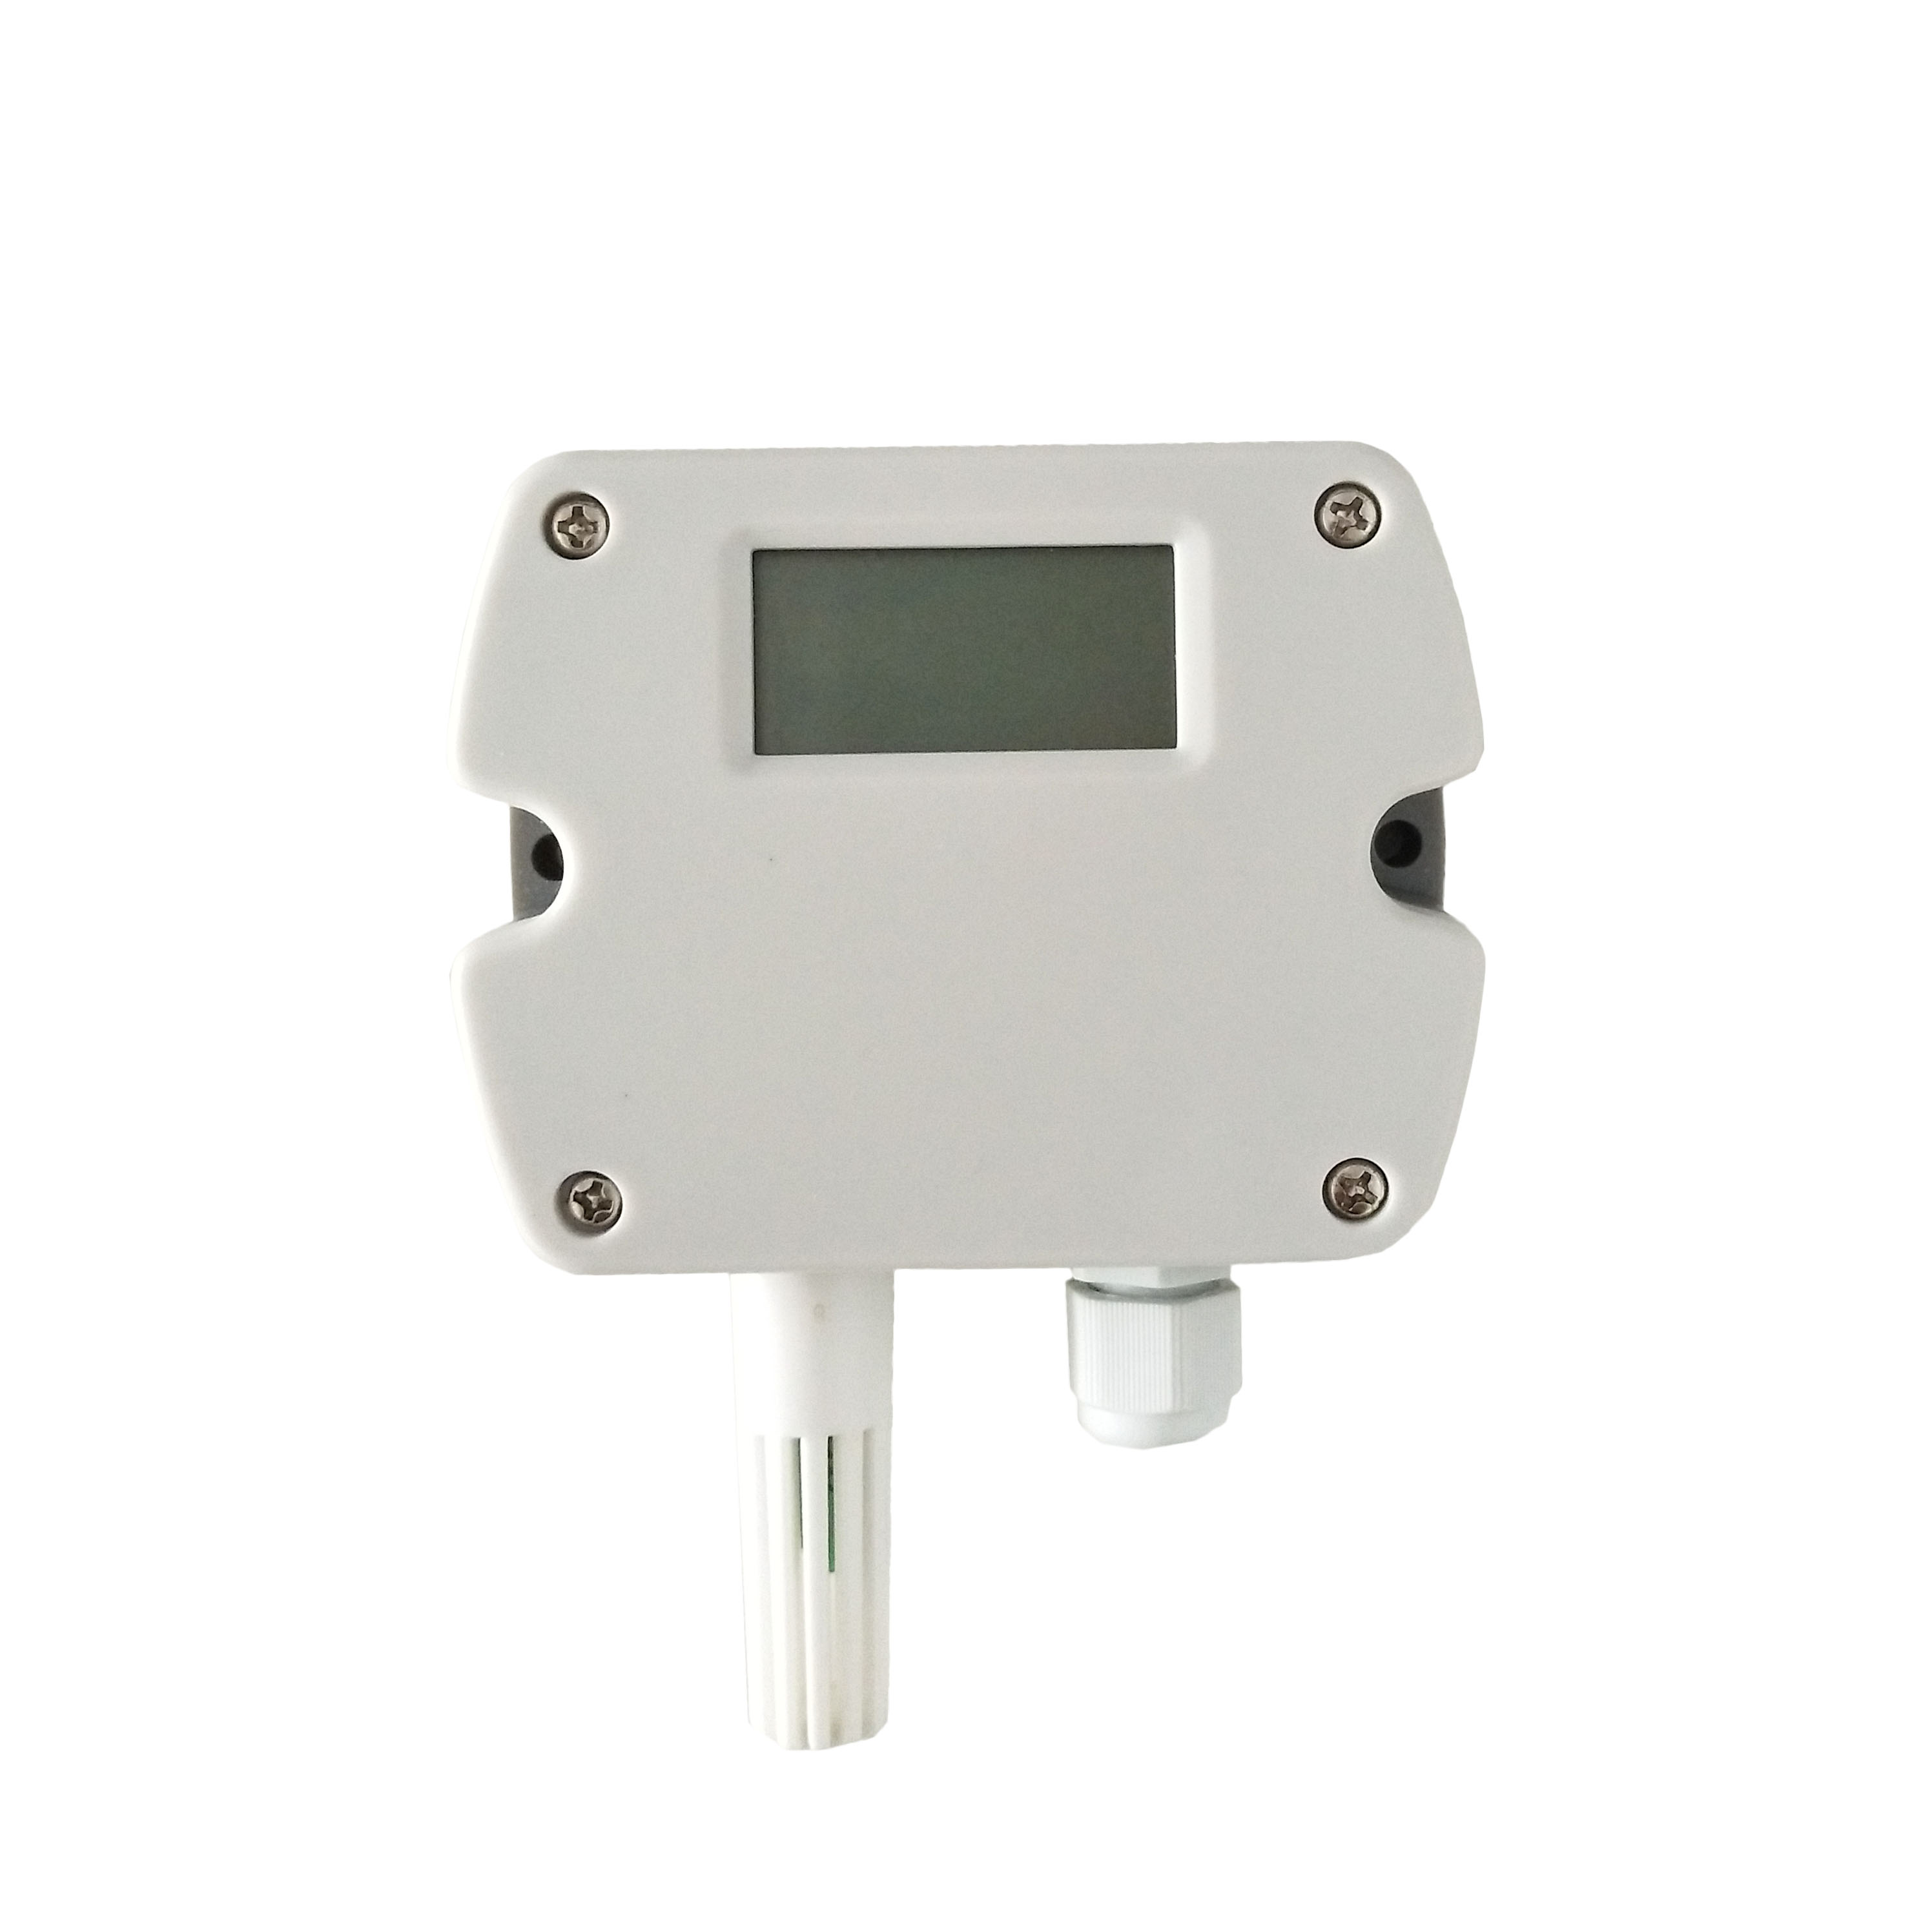 TH-25 Temperature and humidity transmitter